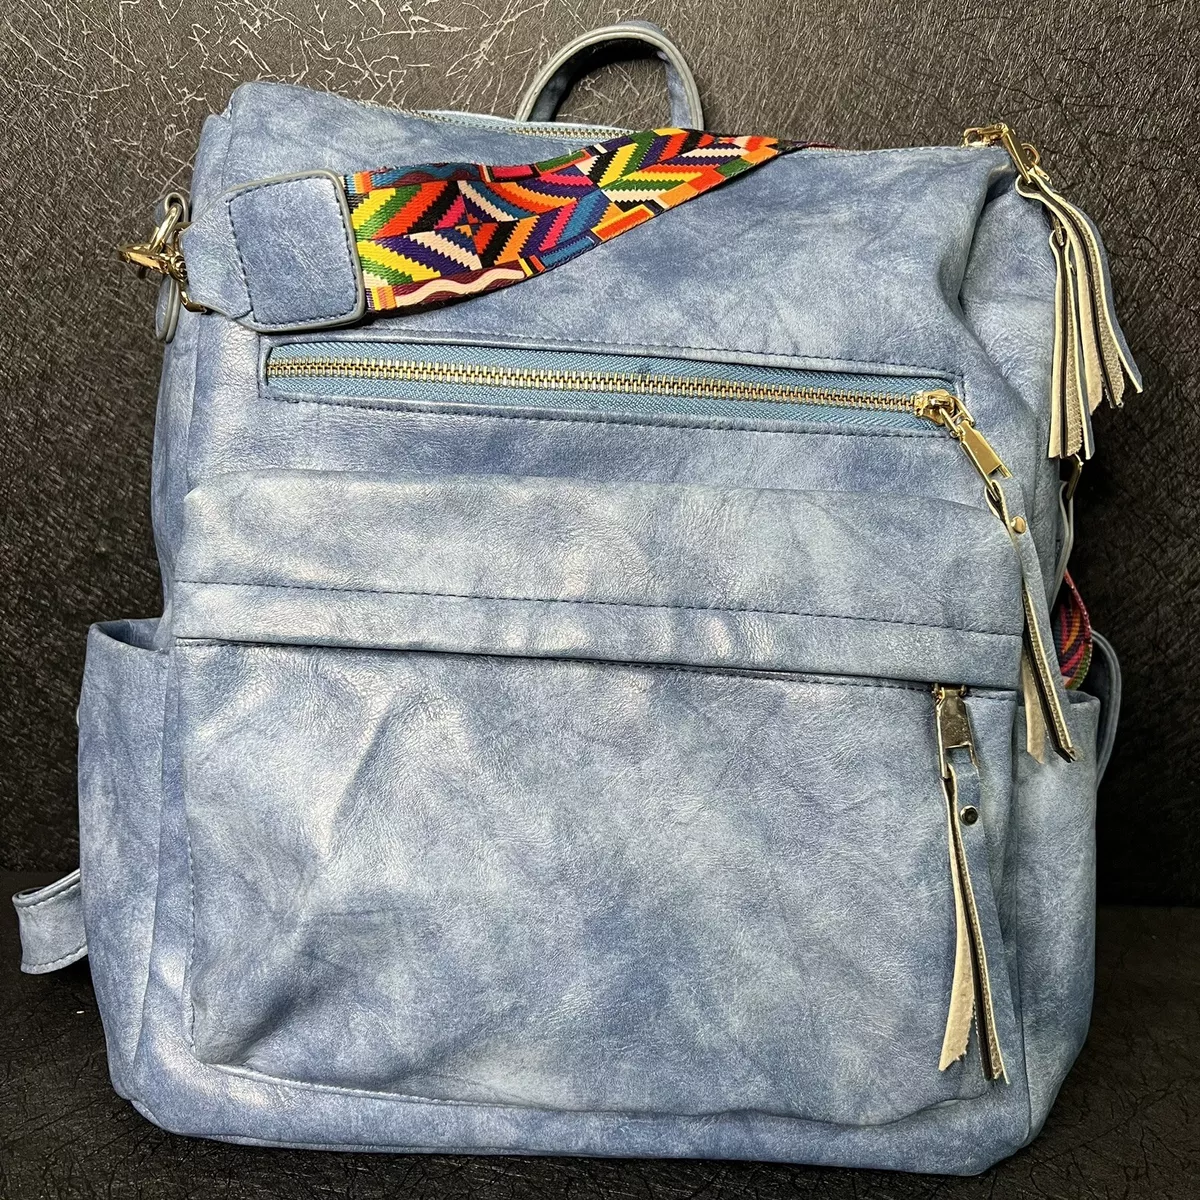 Modern+Chic Brielle Convertible Backpack Sky Blue Vegan Leather w